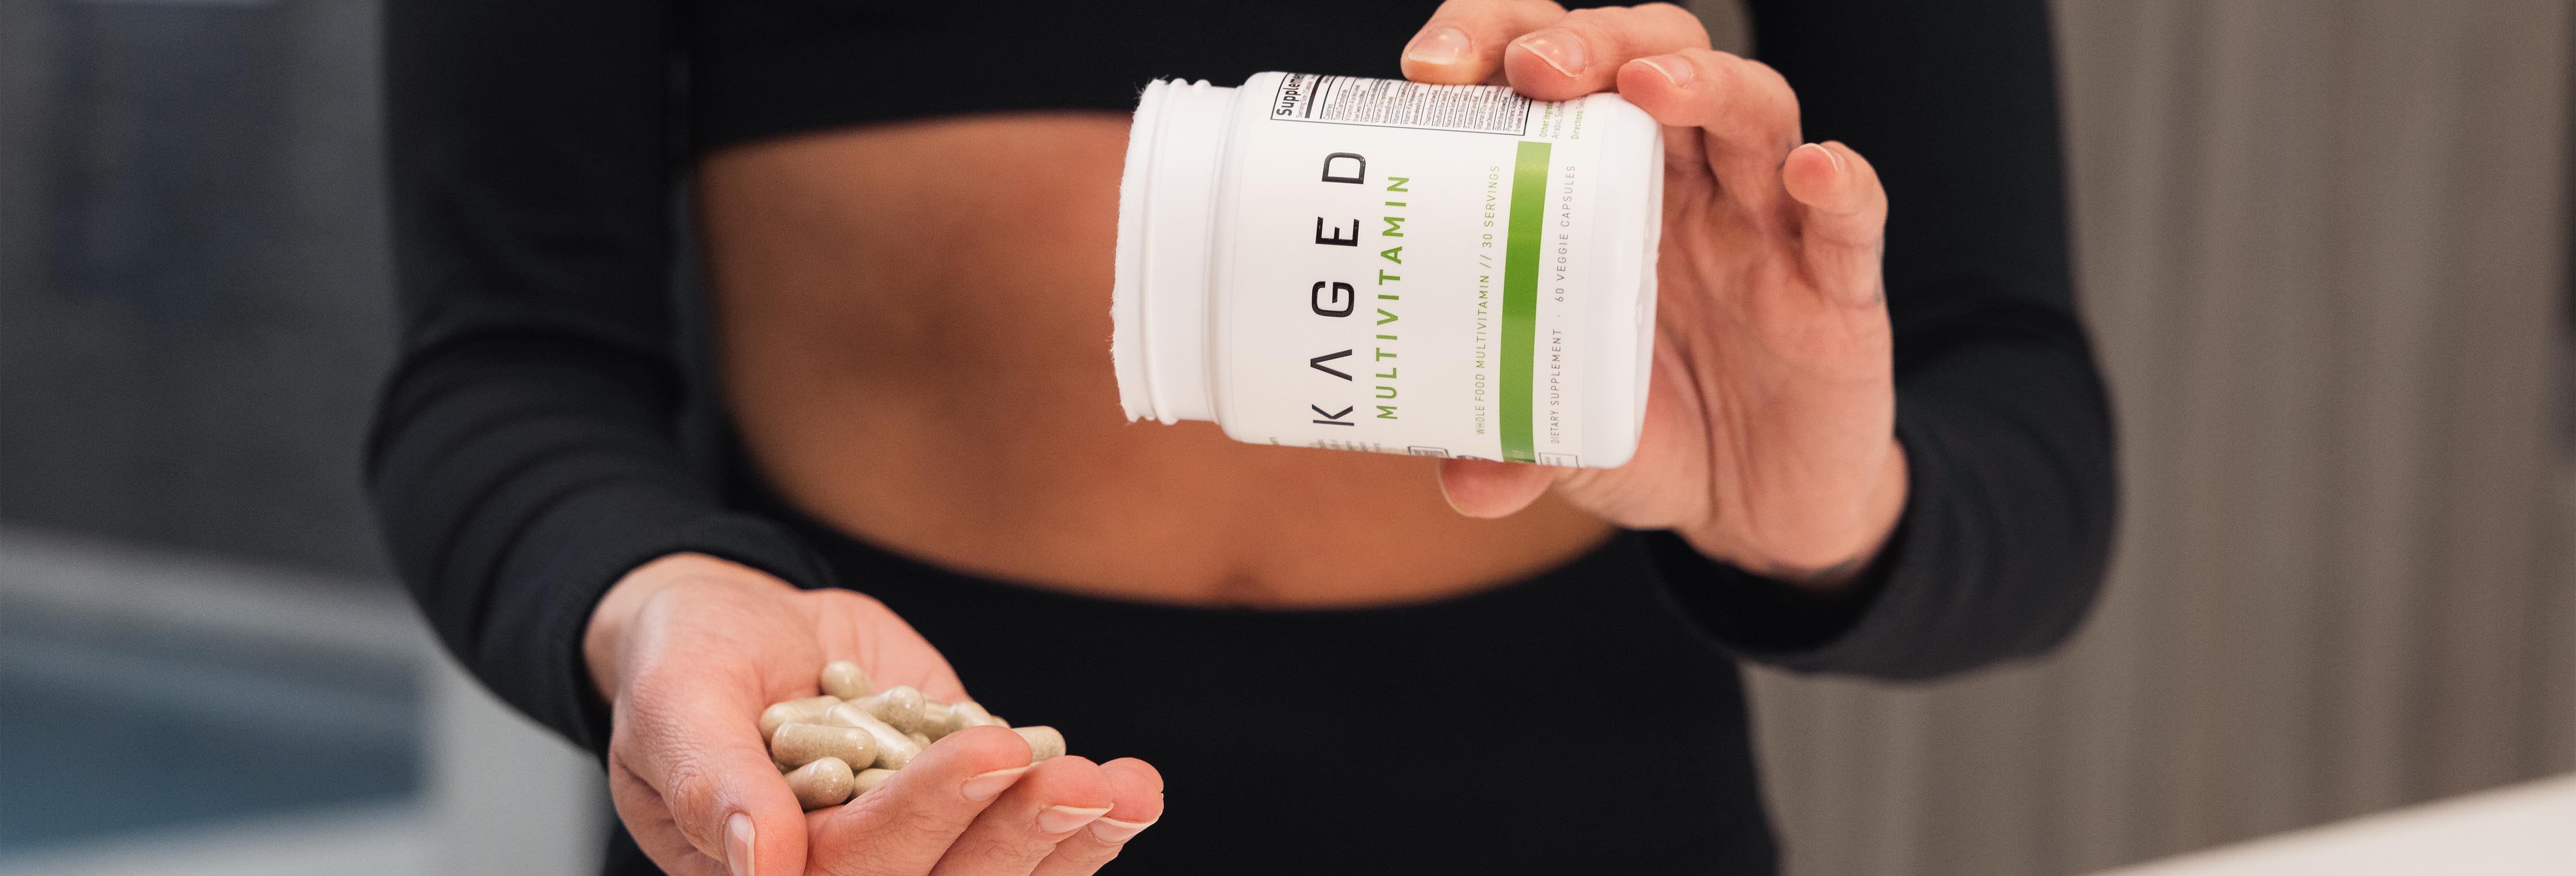 Plantein, Outlive 100 and Multivitamin revealed for Kaged Muscle Naturals